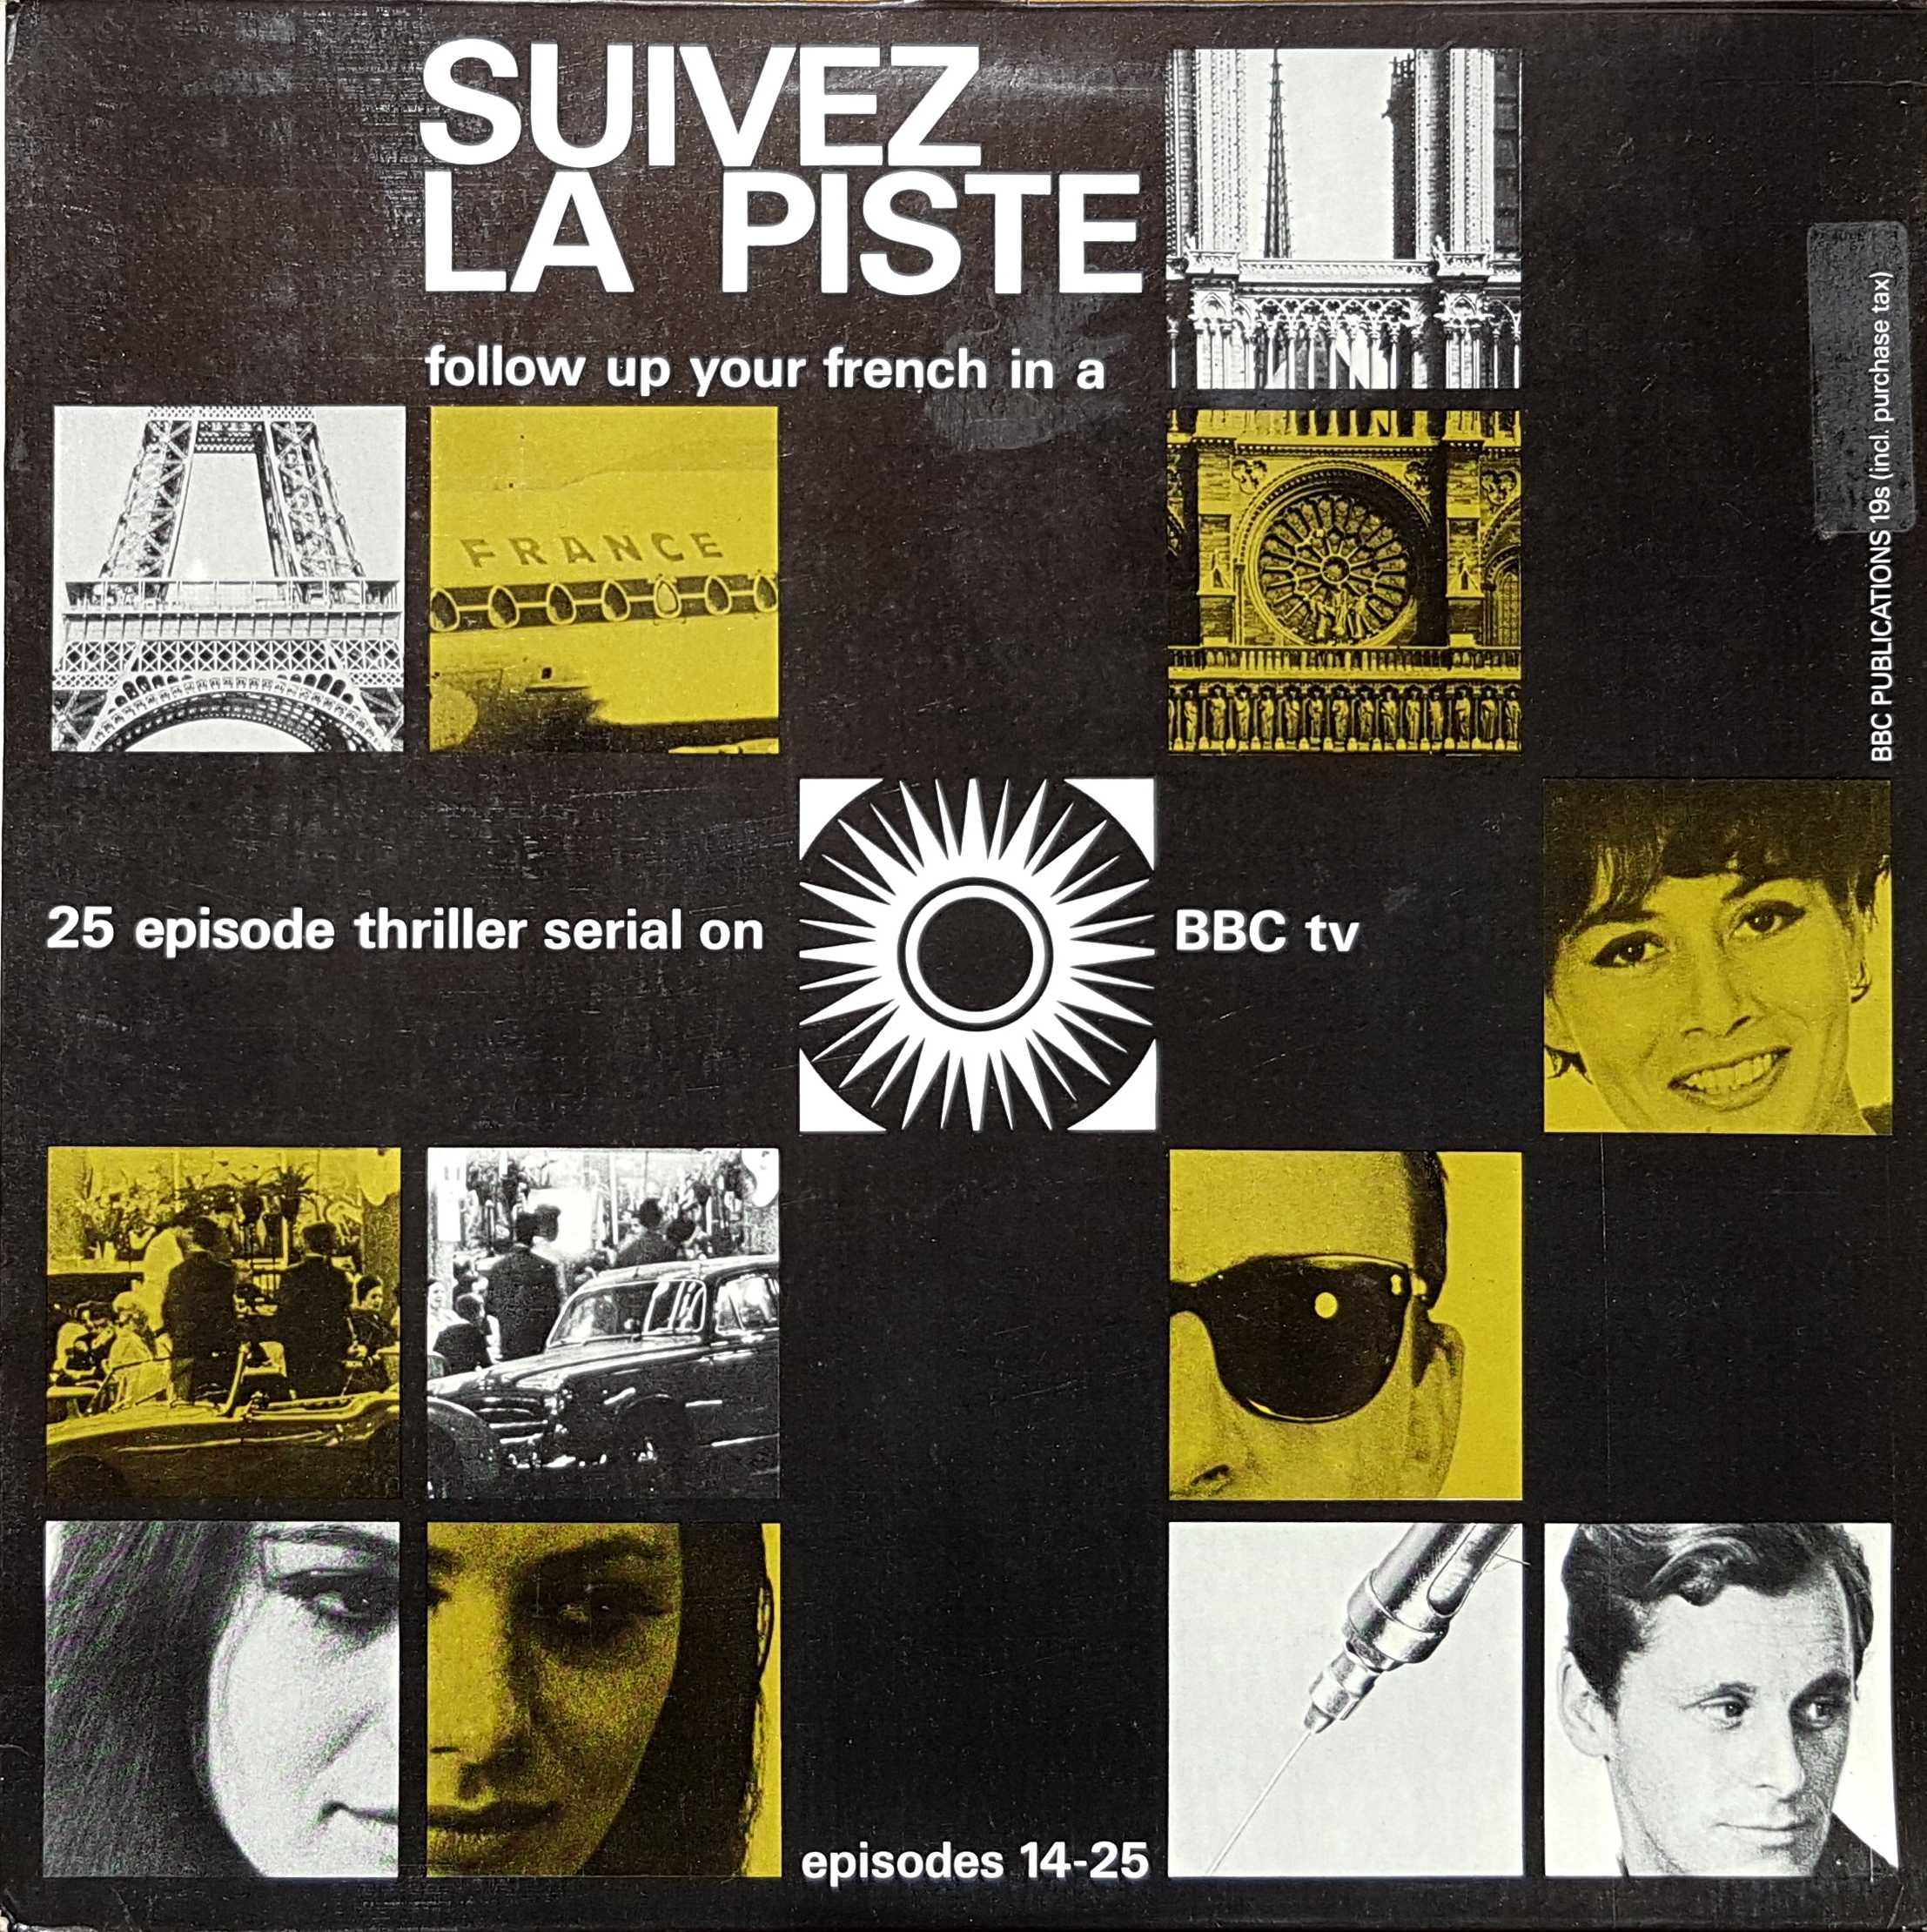 Picture of OP 49/50 Suivez la piste - Follow up your French in a 25 episode thriller serial on BBC tv - Episodes 14 - 25 by artist Emile De Harven / Michel Blanc / Denys Player / John Trim from the BBC albums - Records and Tapes library